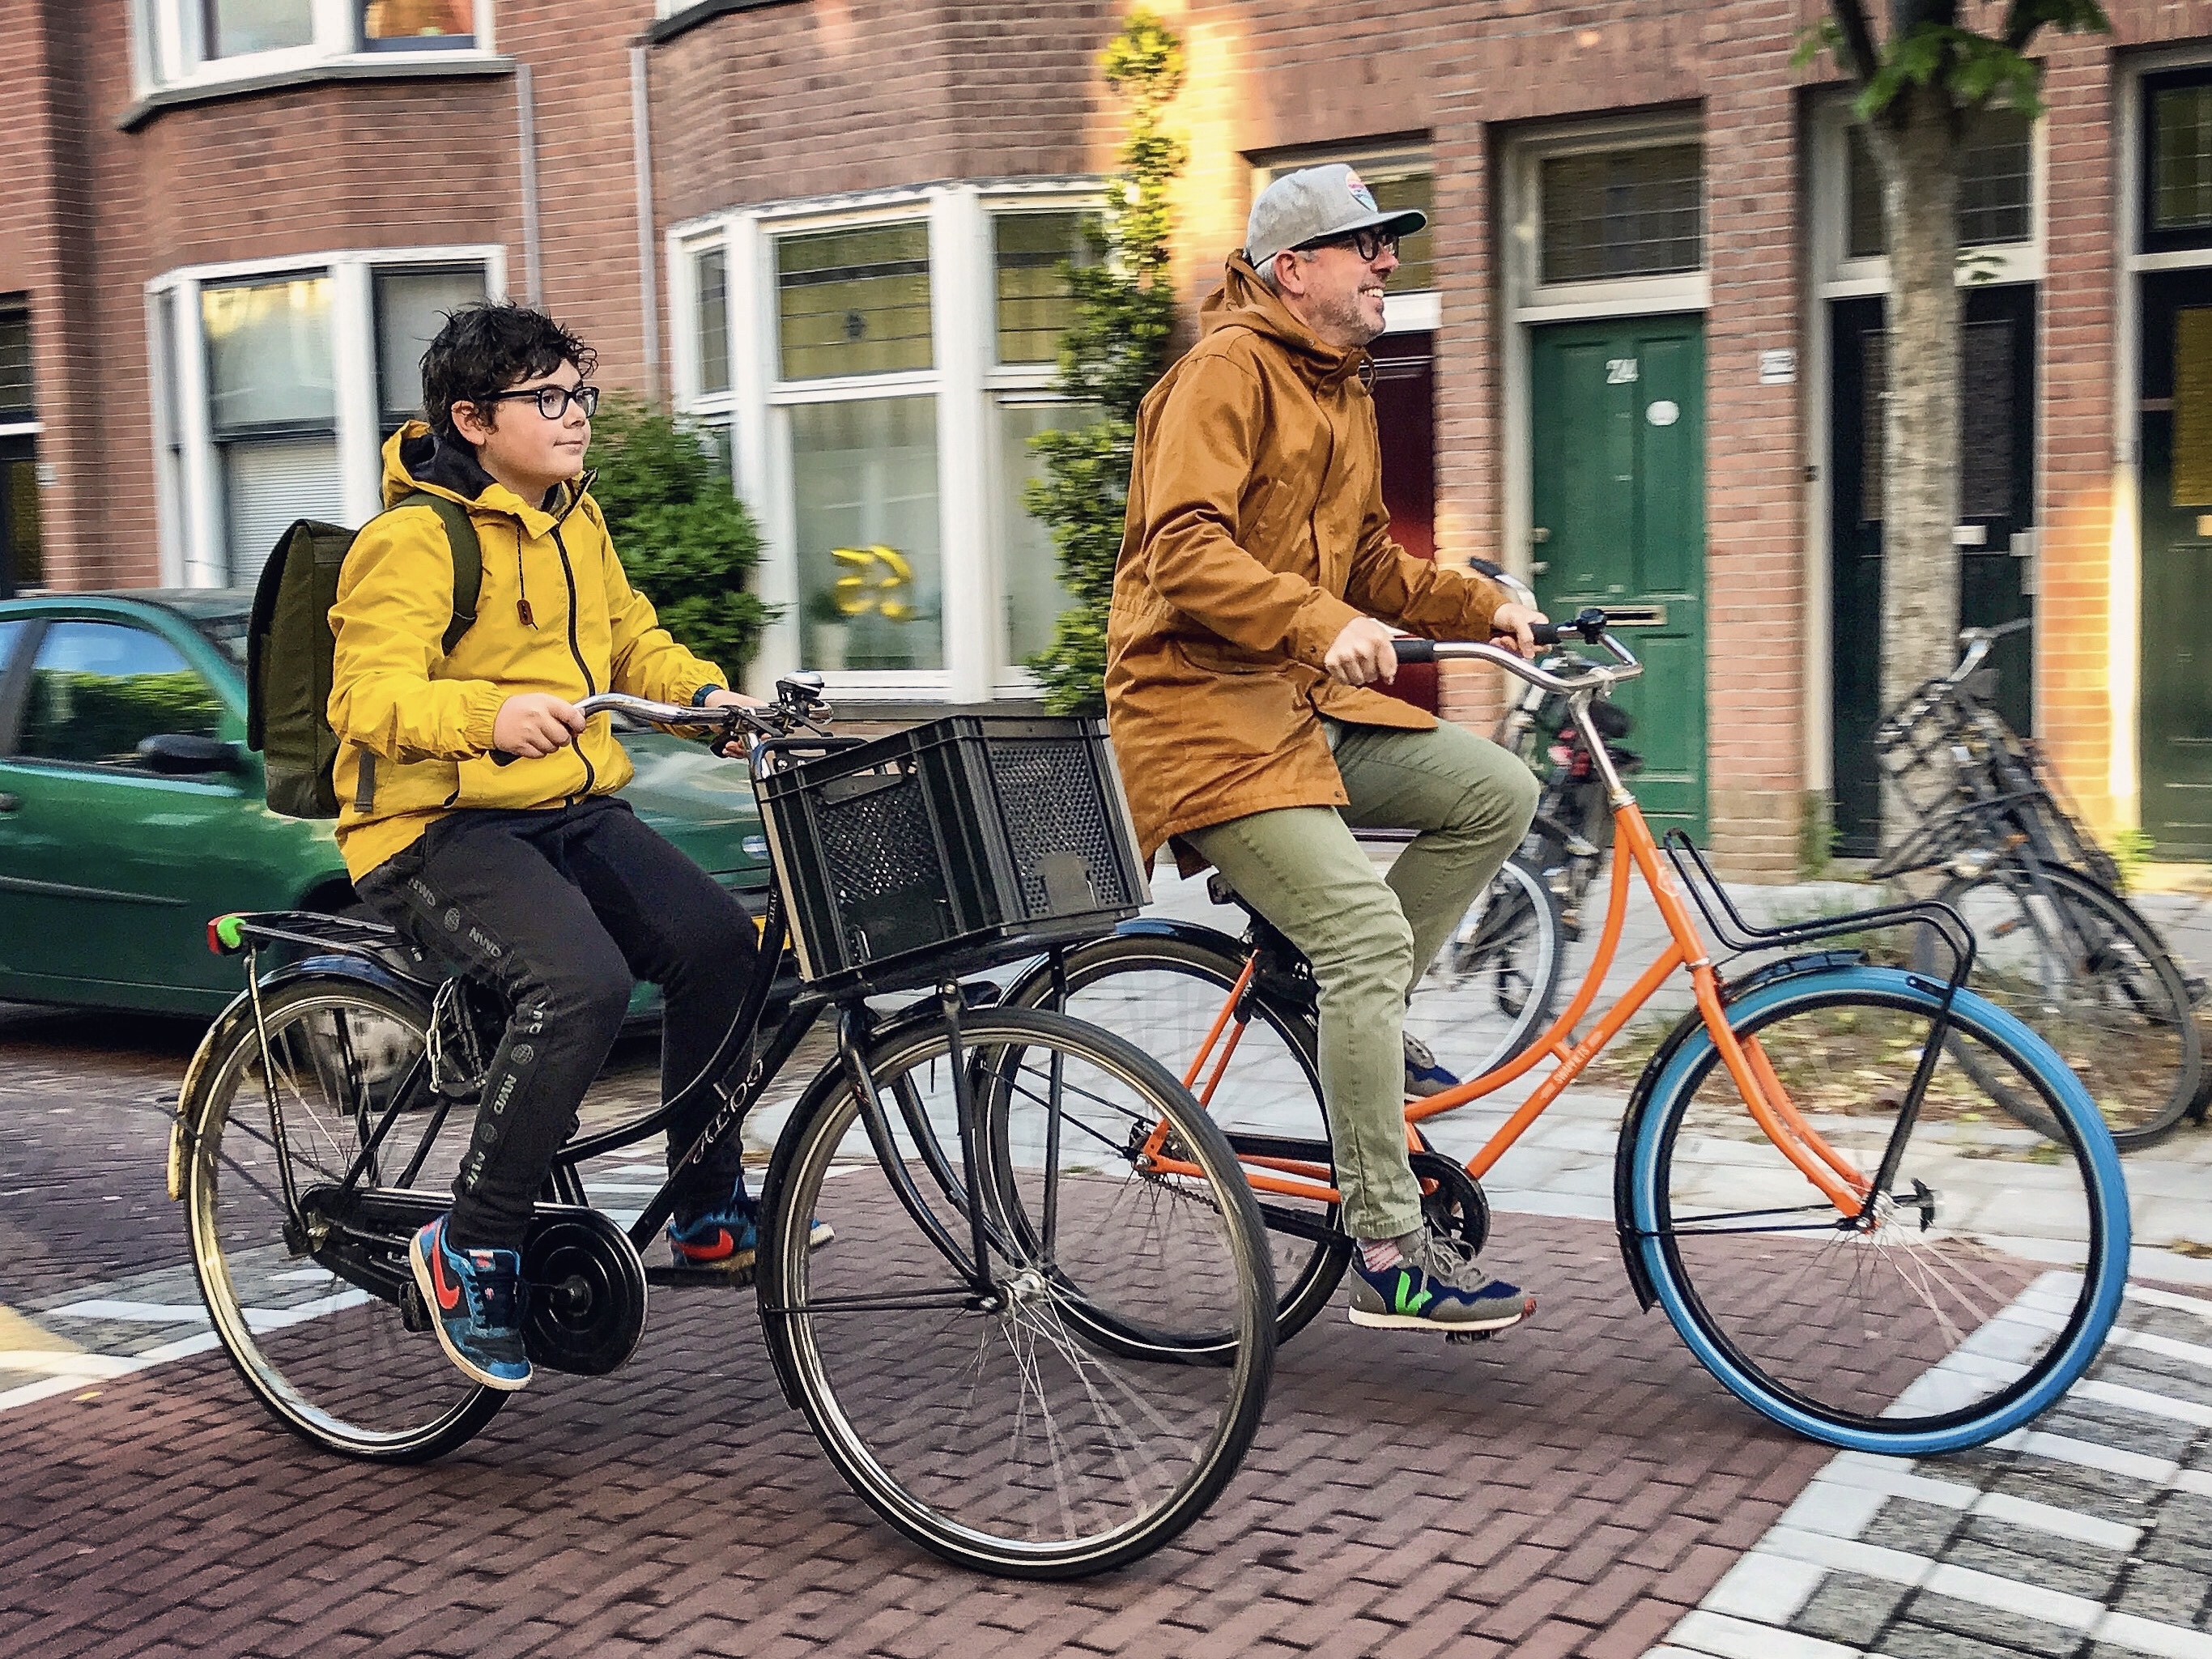 Chris Bruntlett and his son cycle next to each other on a Dutch street 